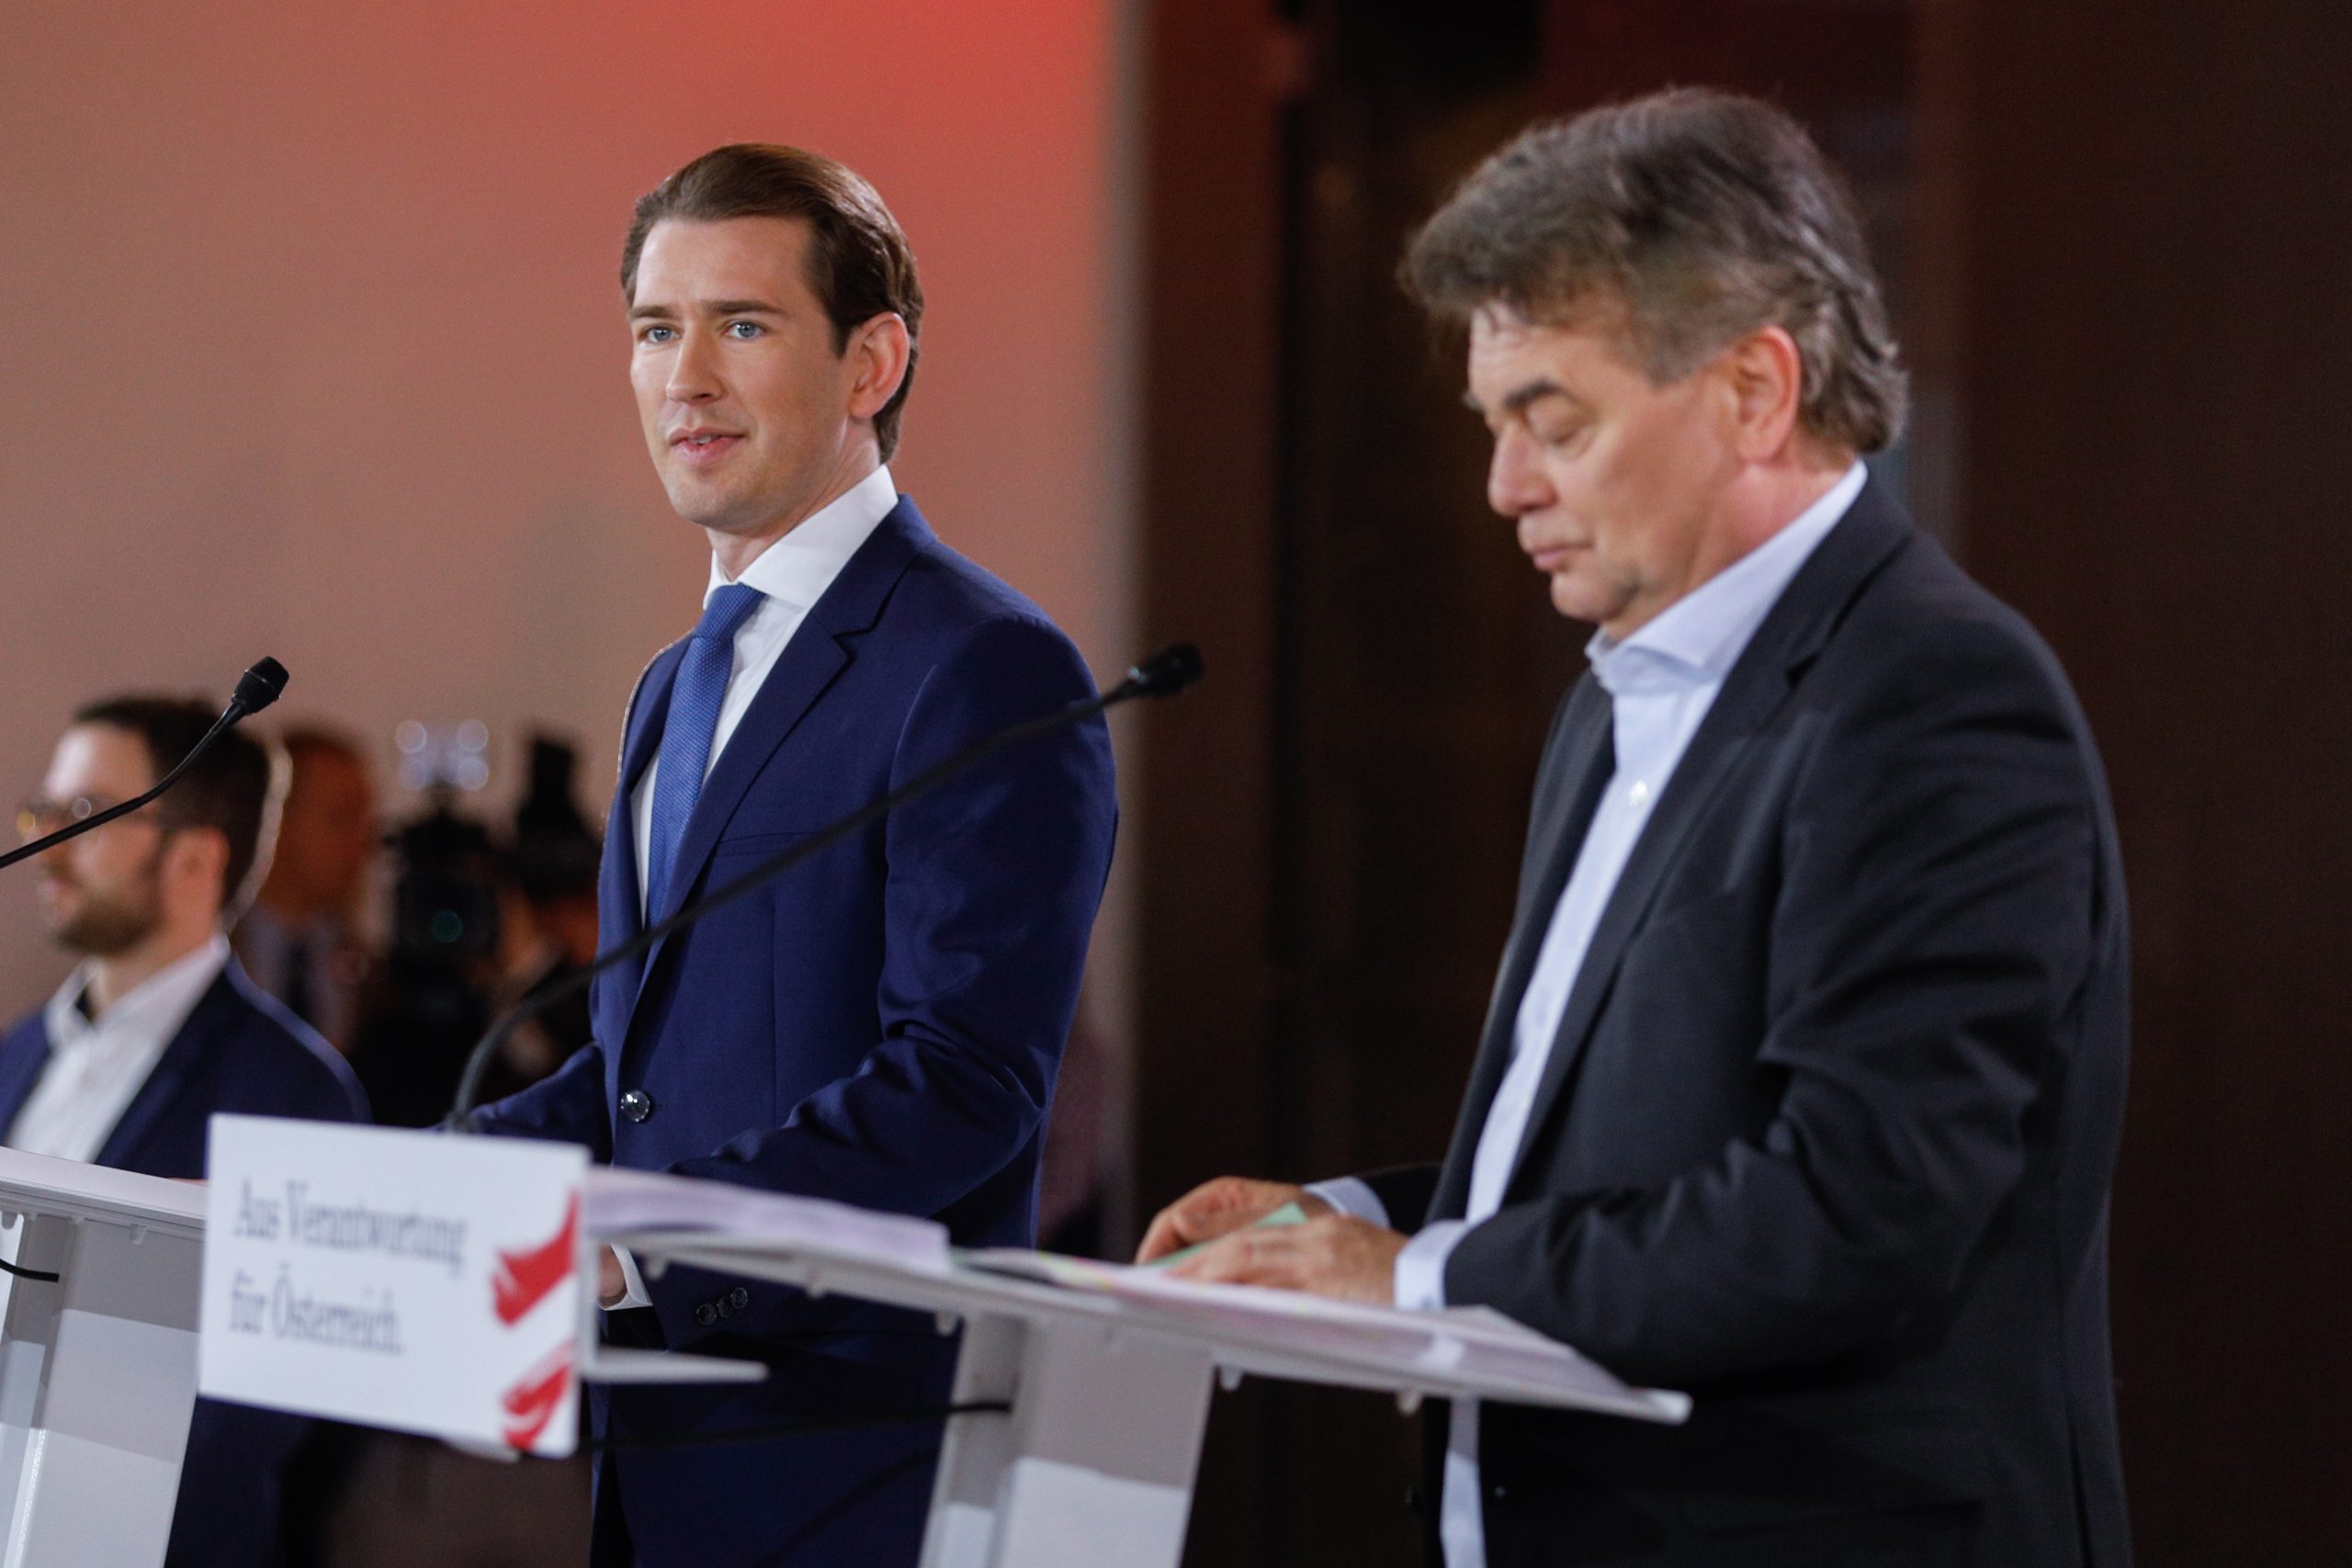 epa08098724 Leader of Austrian People's Party (OeVP), Sebastian Kurz (L), and Leader of the Austrian Green Party, Werner Kogler, during a press conference to present the government program in Vienna, Austria, 02 January 2020. Kurz and Kogler agreed on a coalition of the OeVP and the Green Party to form a new government on 01 January 2020.  EPA/FLORIAN WIESER